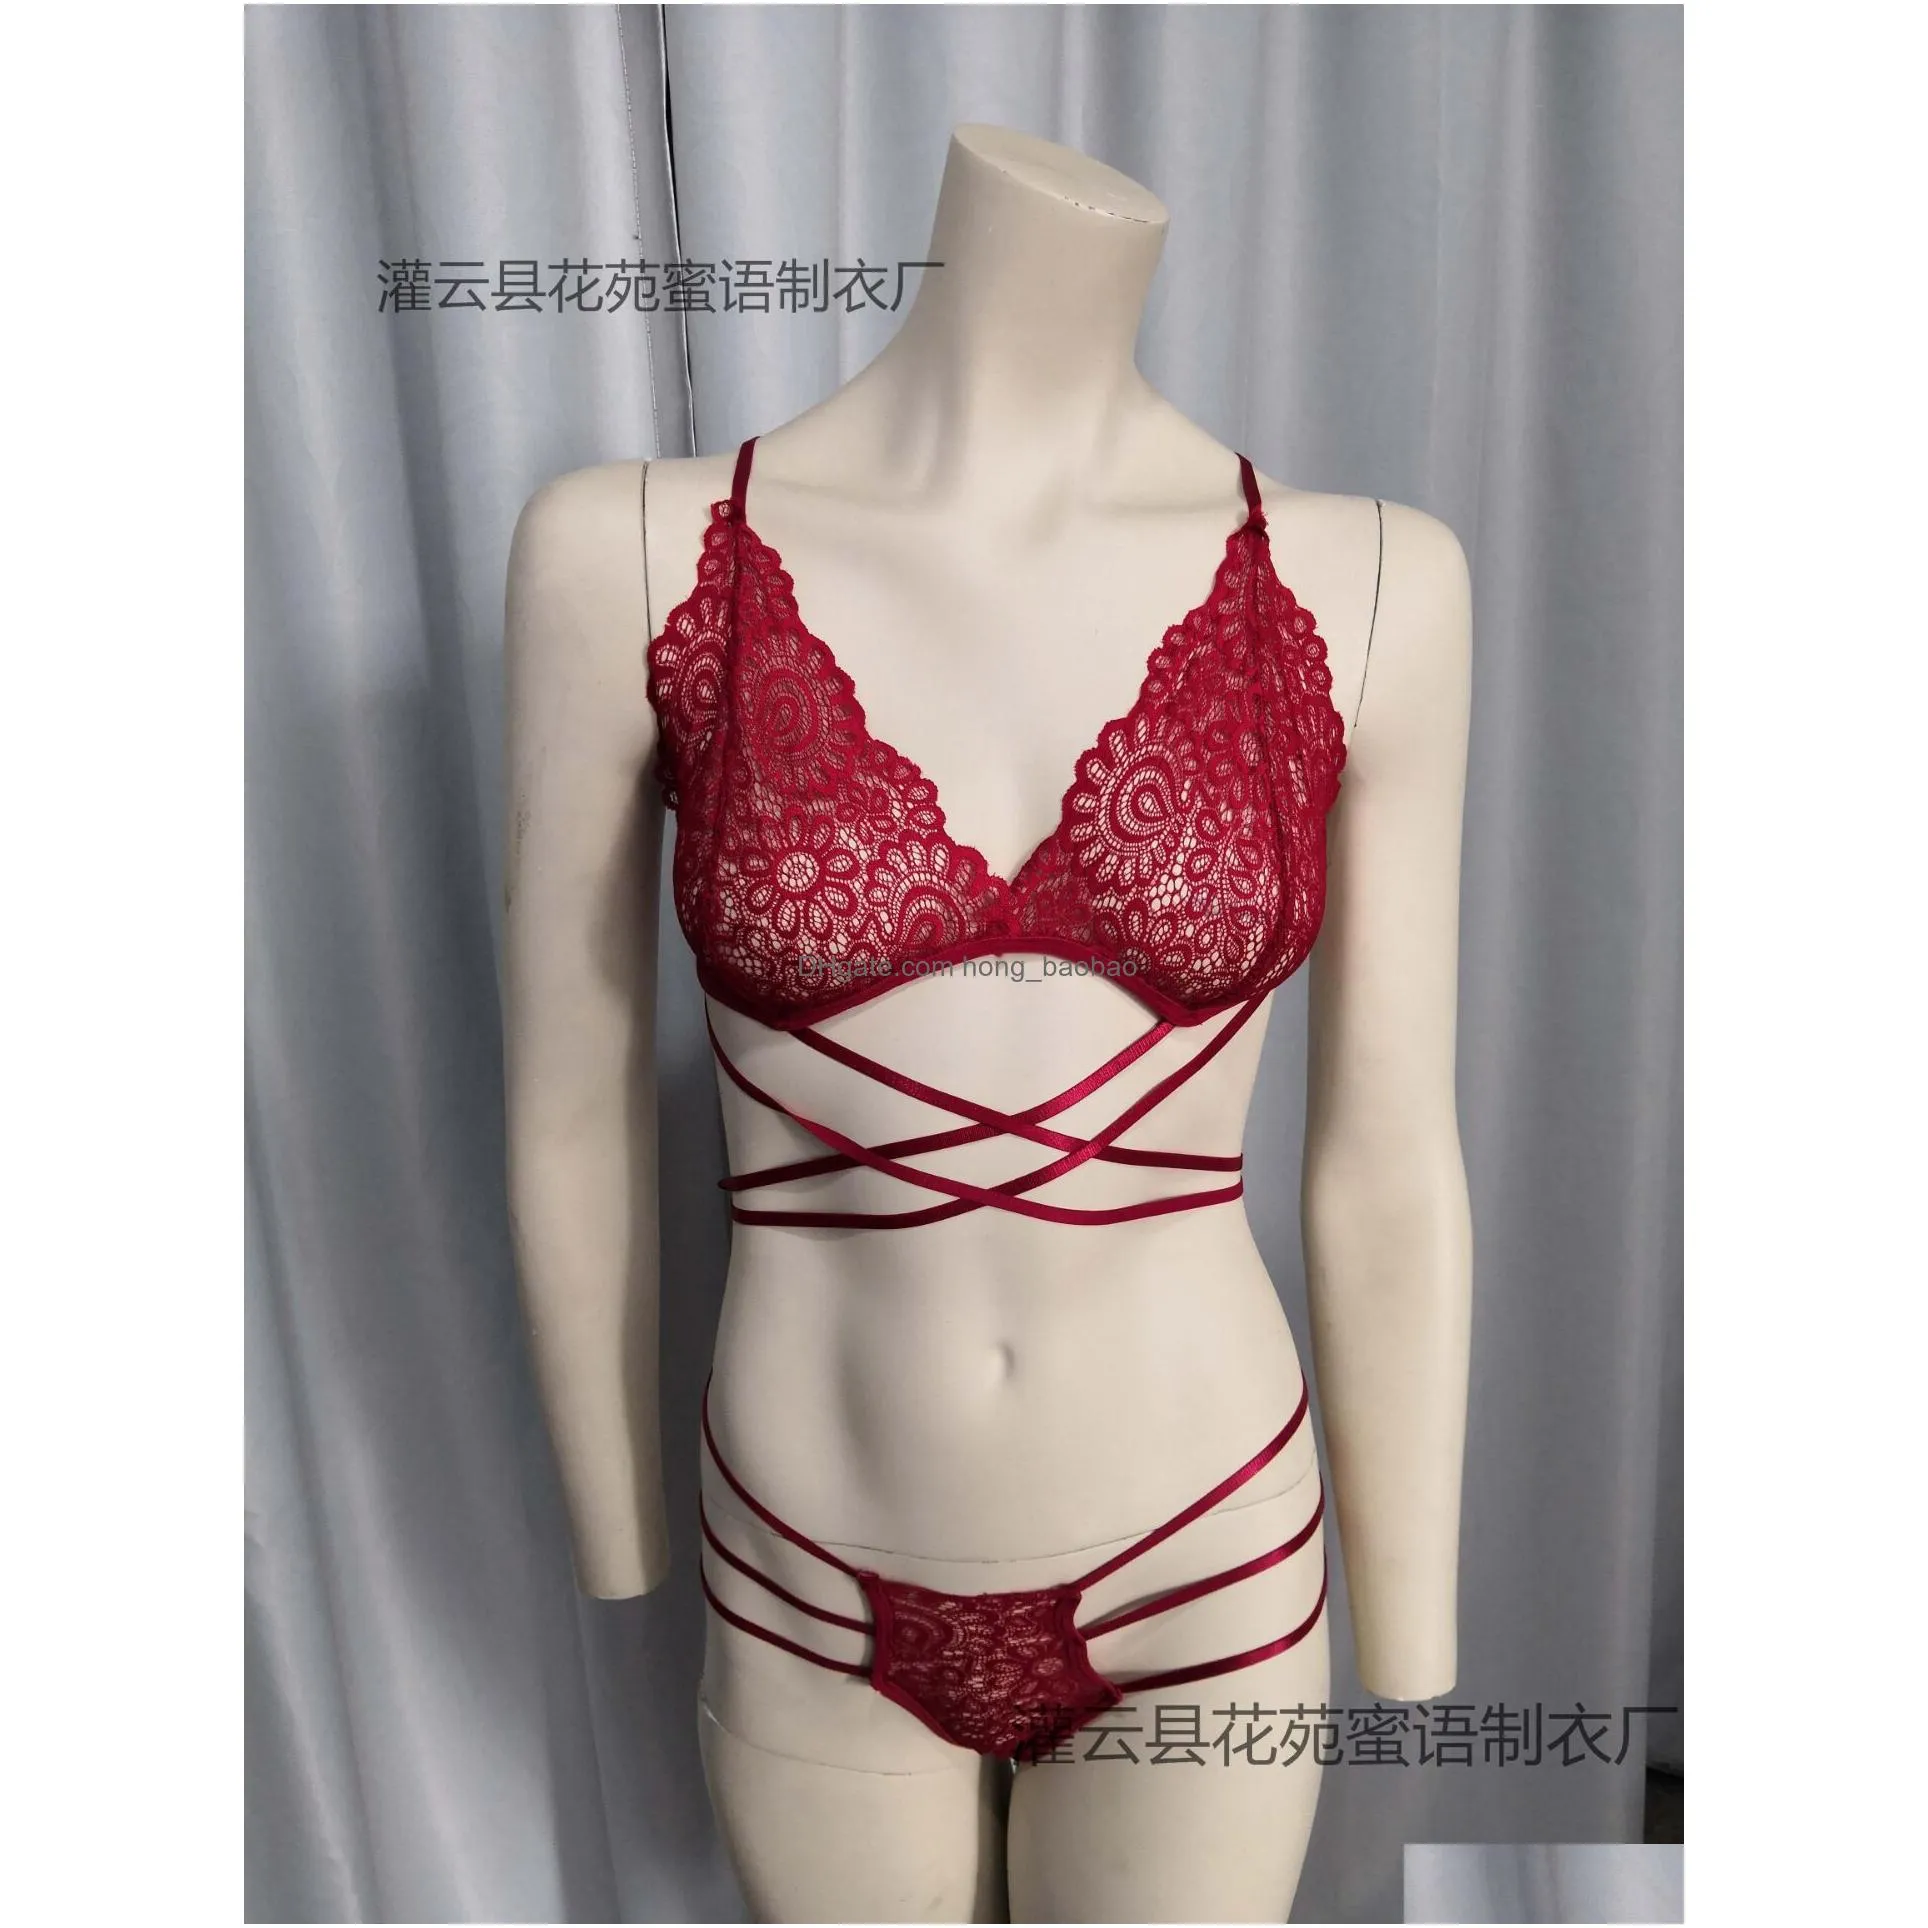 european and americanstyle bikini sexy lingerie sexy hollow cross laceup bikini suit factory direct sexy skirt